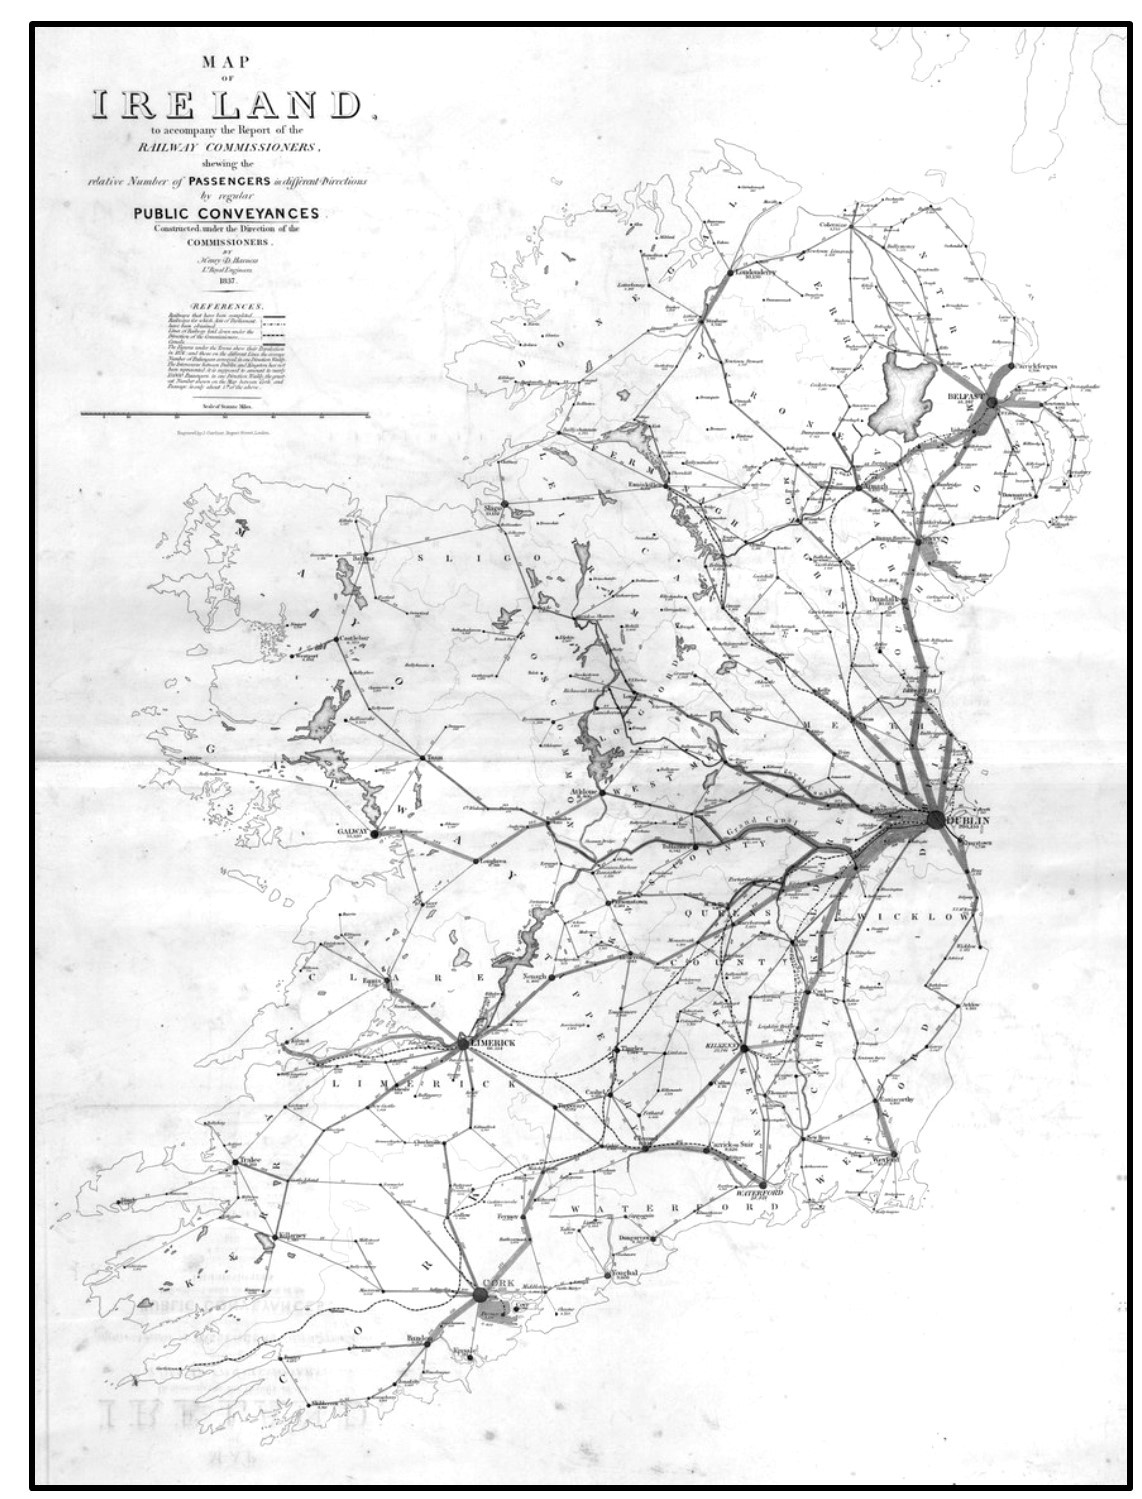 Black and white map of Ireland showing the rail way routes.